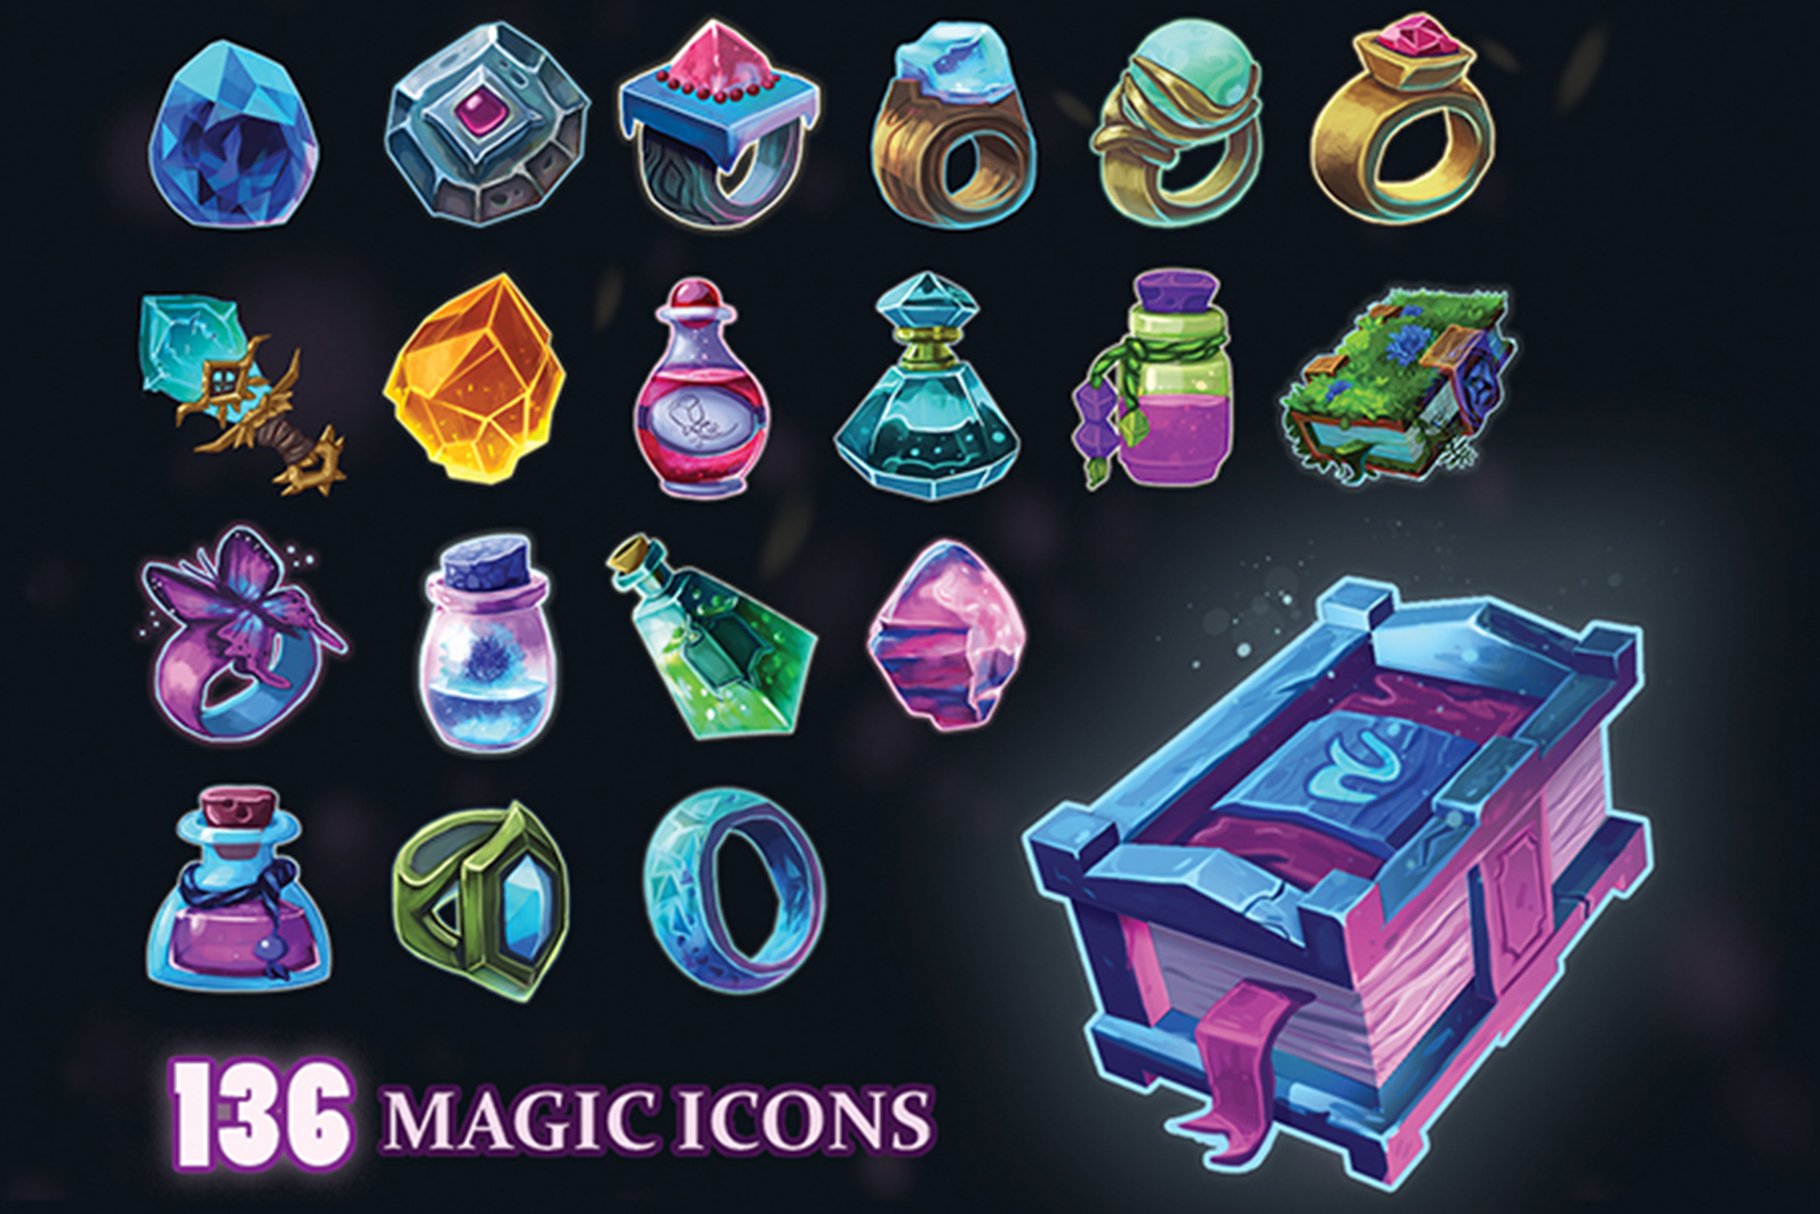 Stylized Magic Icons Pack cover image.